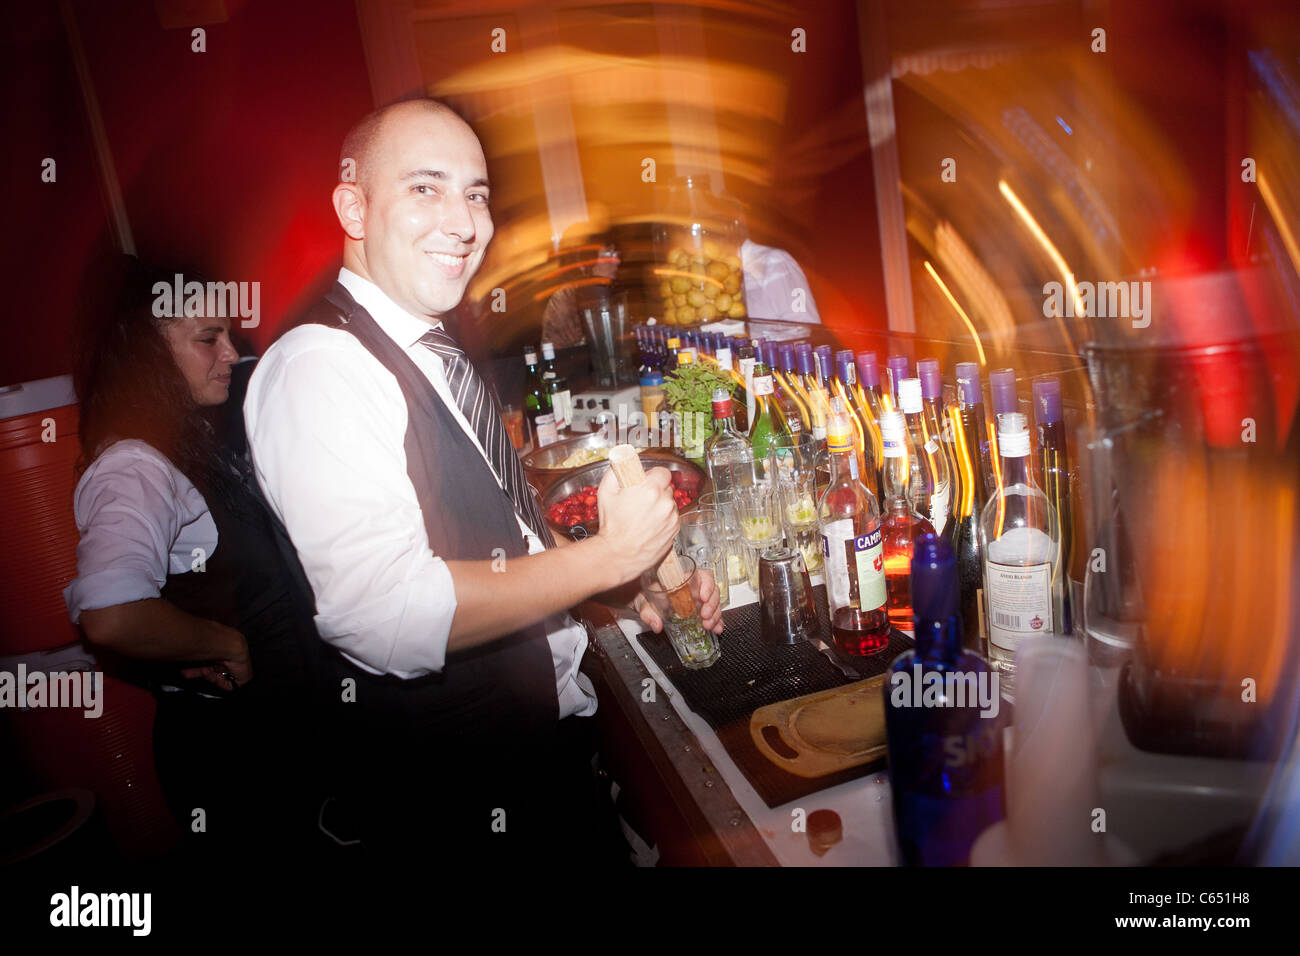 A bar tender in a bar preparing a drink and smiling with happiness Stock Photo